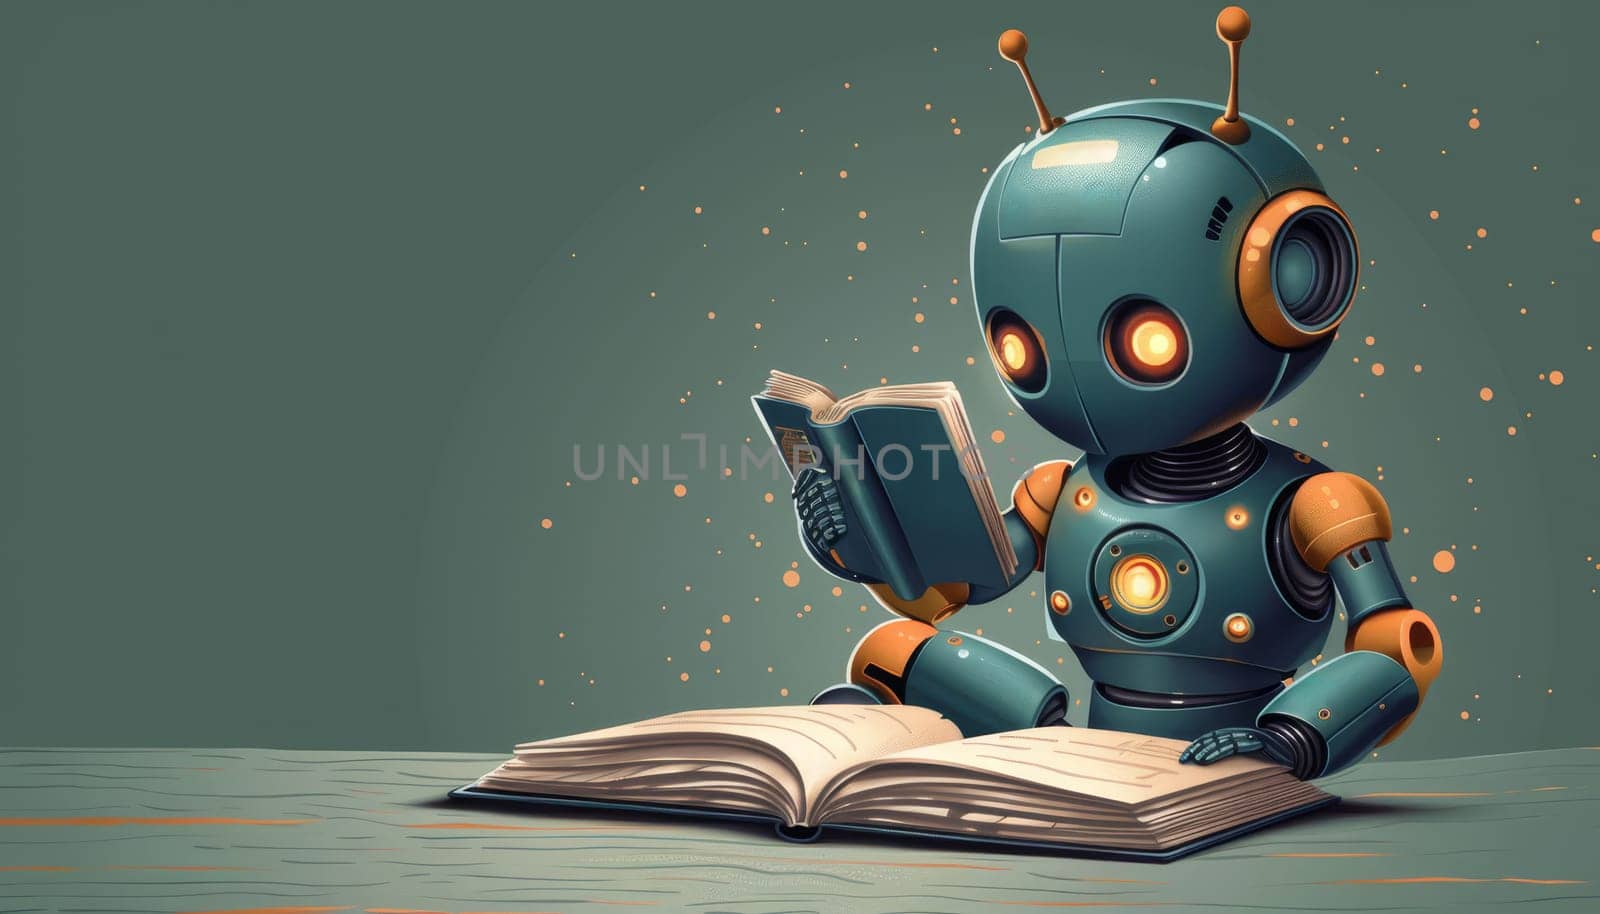 A robot is reading a book by AI generated image.